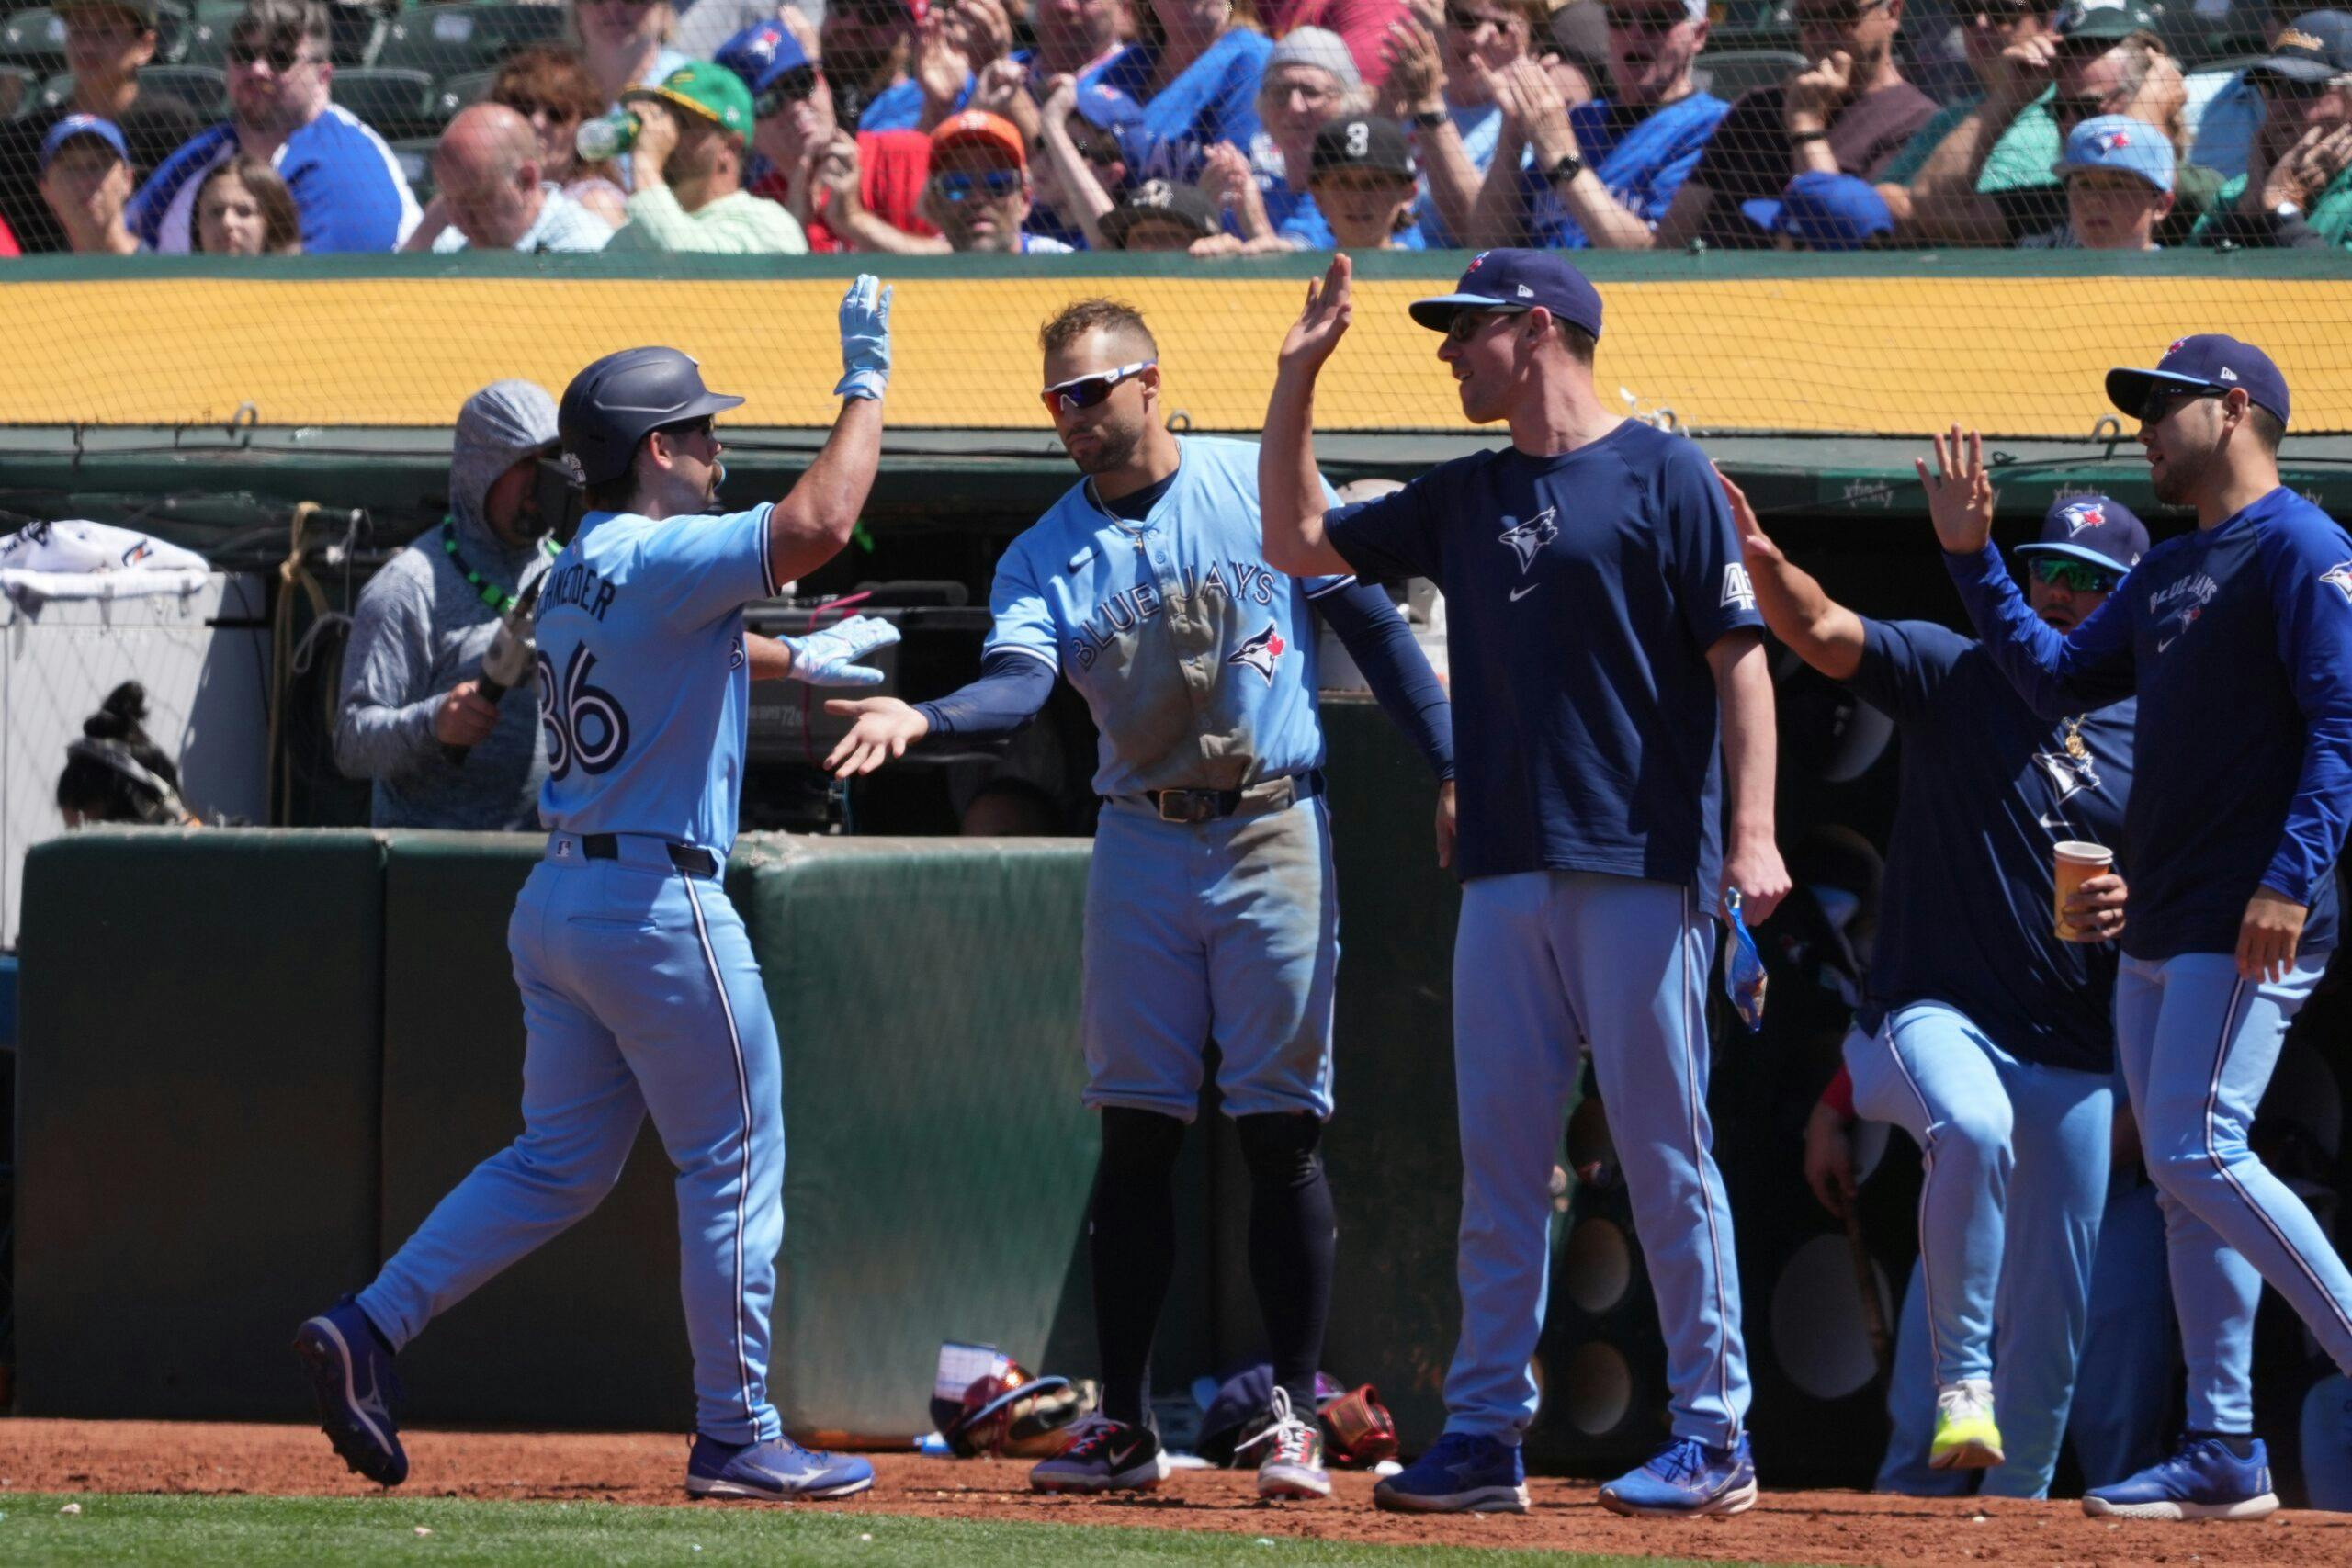 Toronto Blue Jays pinch hitter Davis Schneider (36) is congratulated by teammates after hitting an RBI-sacrifice fly against the Oakland Athletics during the eighth inning at Oakland-Alameda County Coliseum